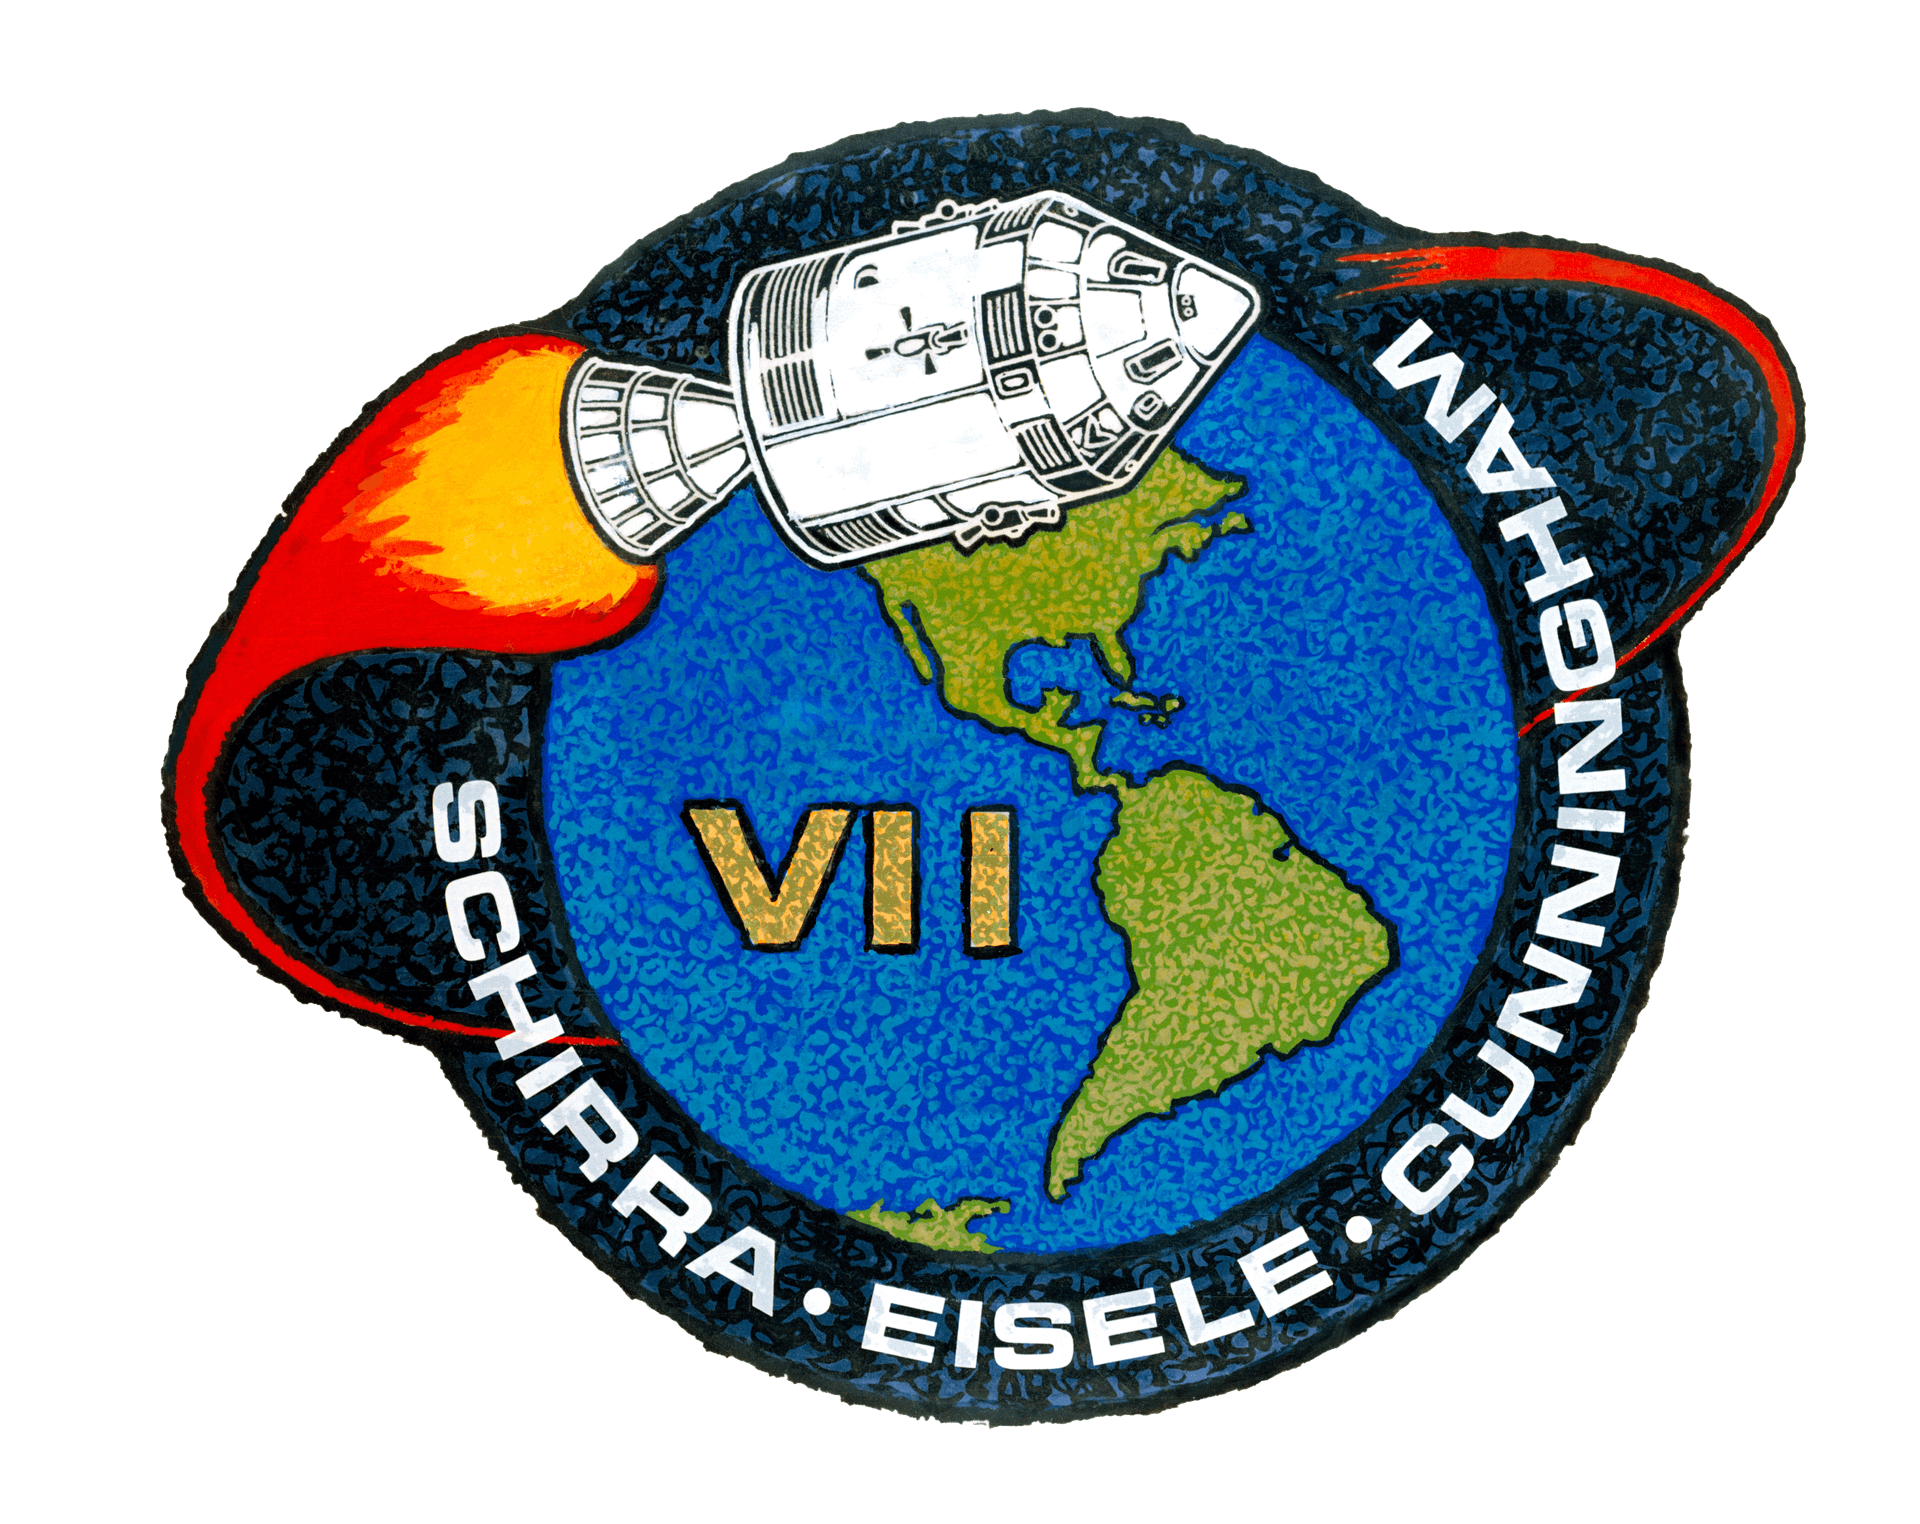 Mission patch for Apollo 7